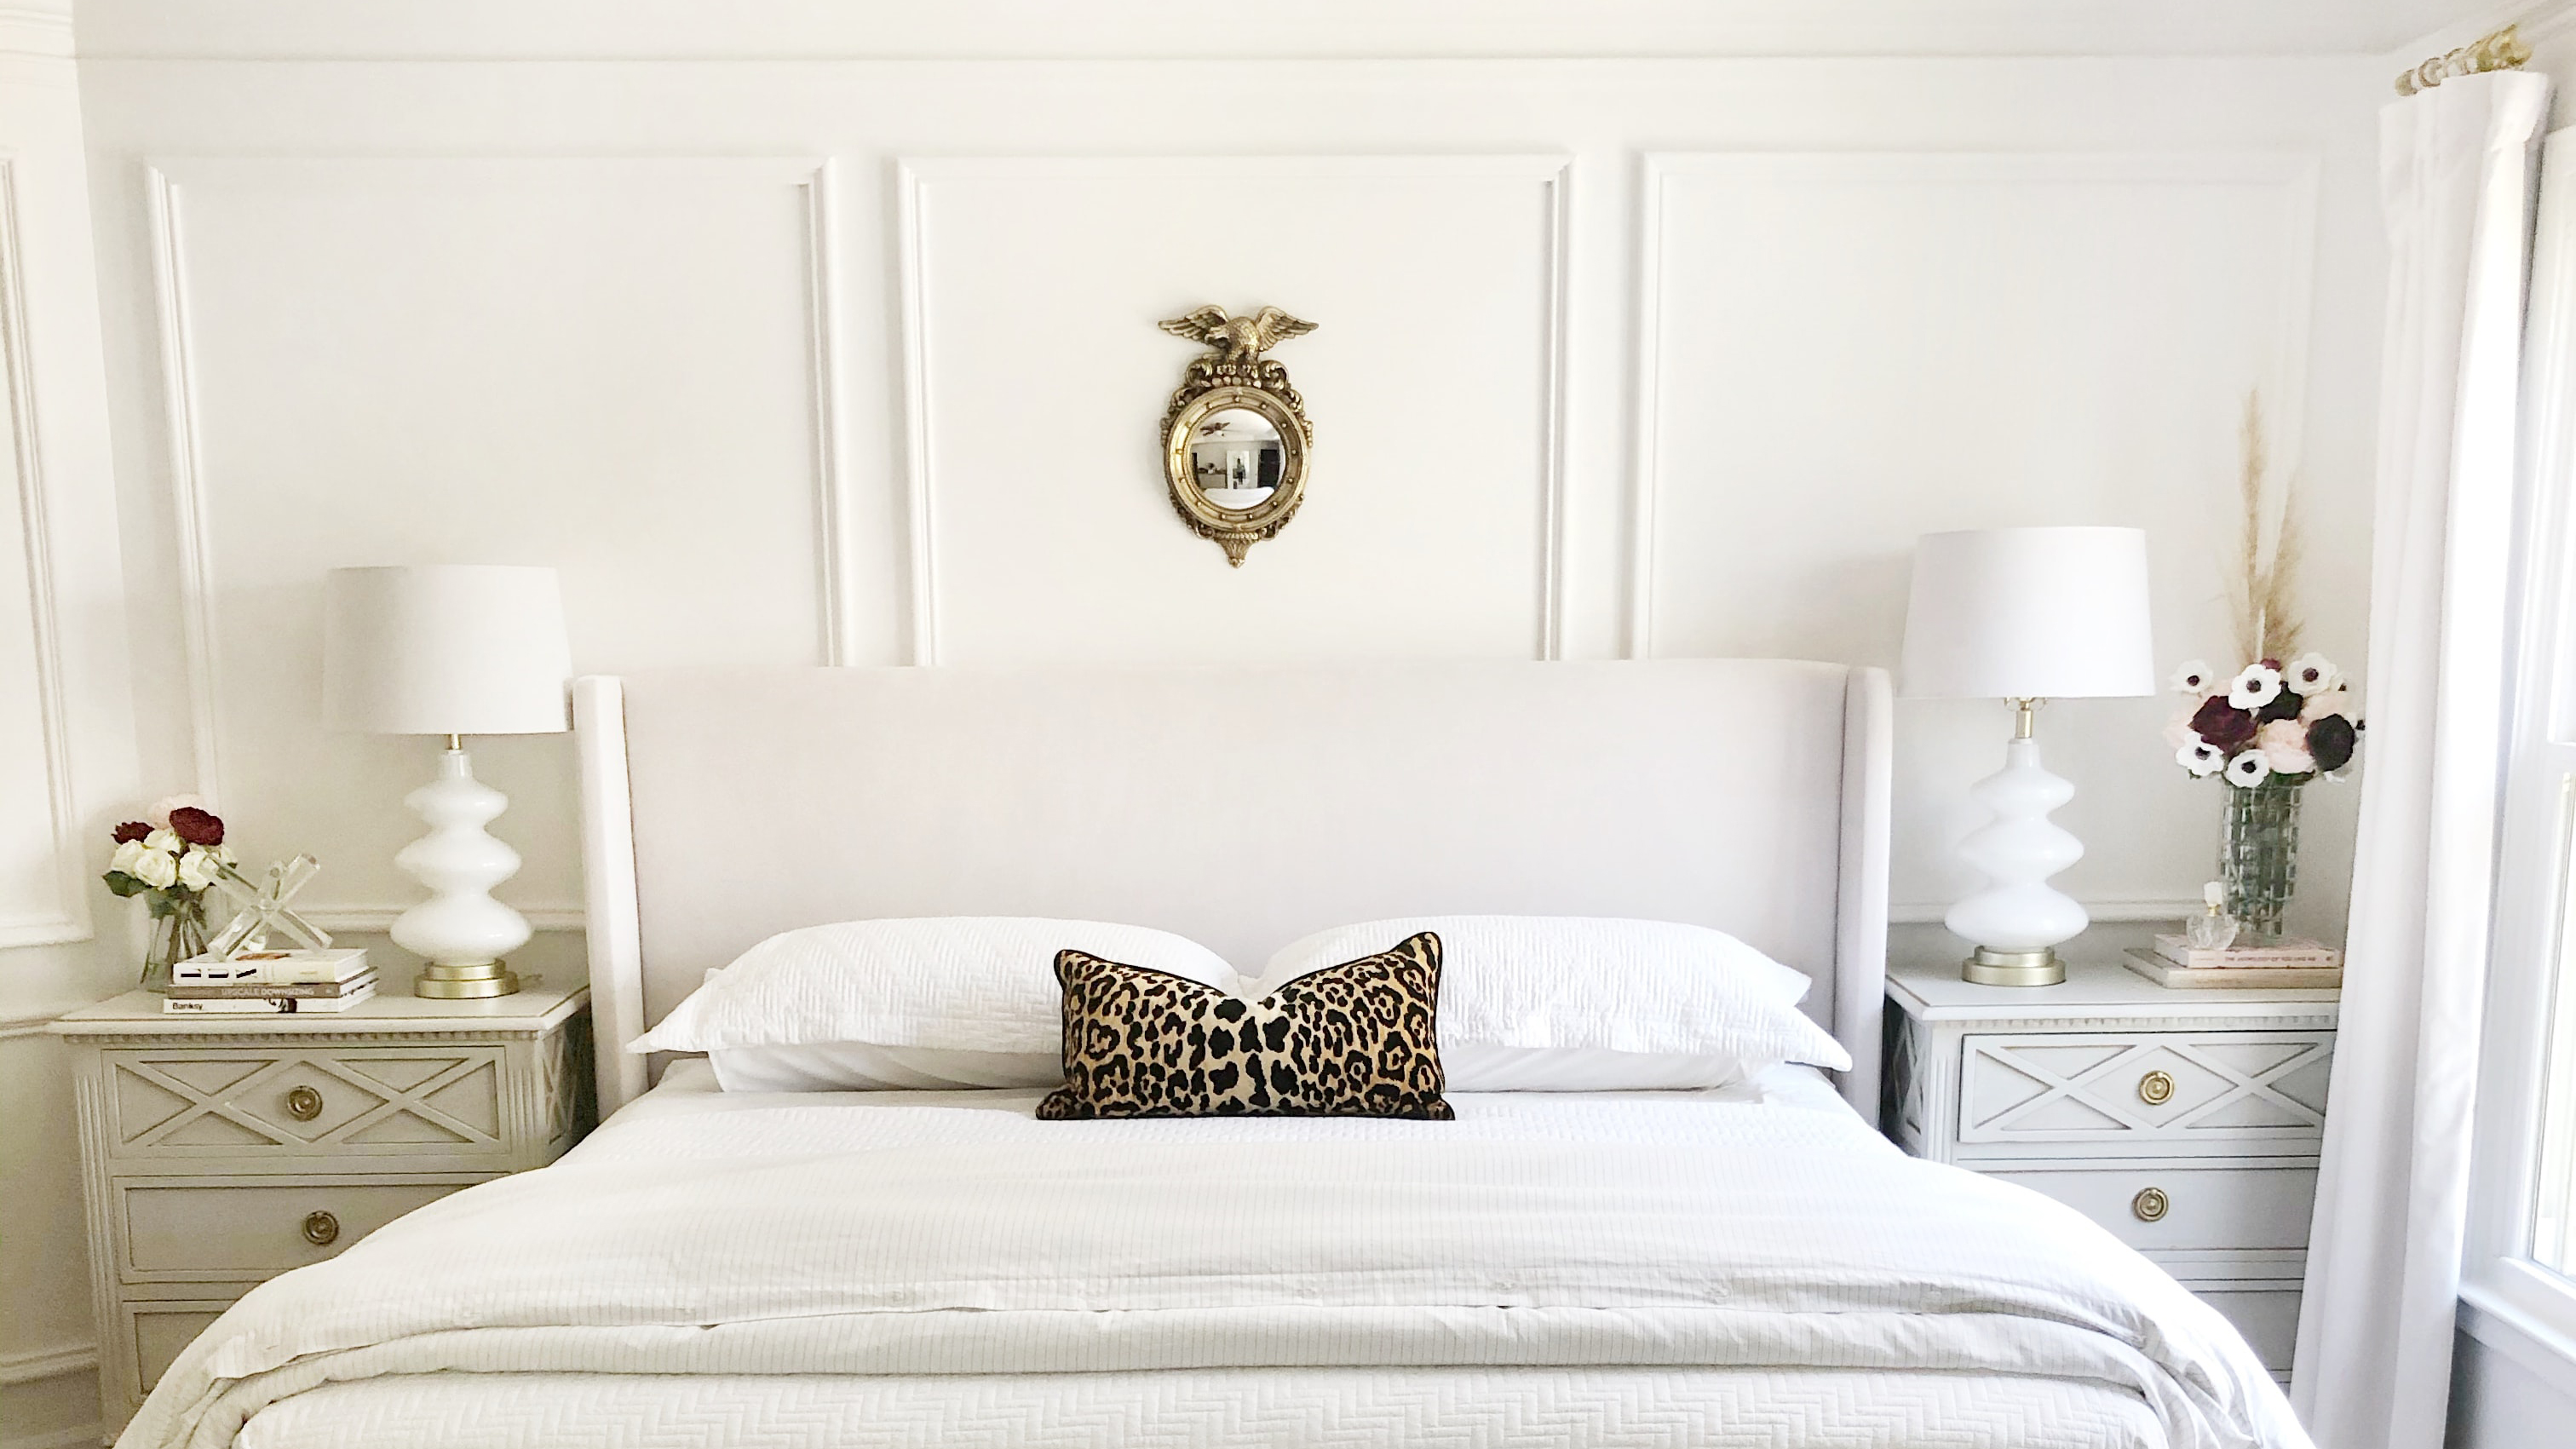 White decorative wall cladding used as a bedroom headboard